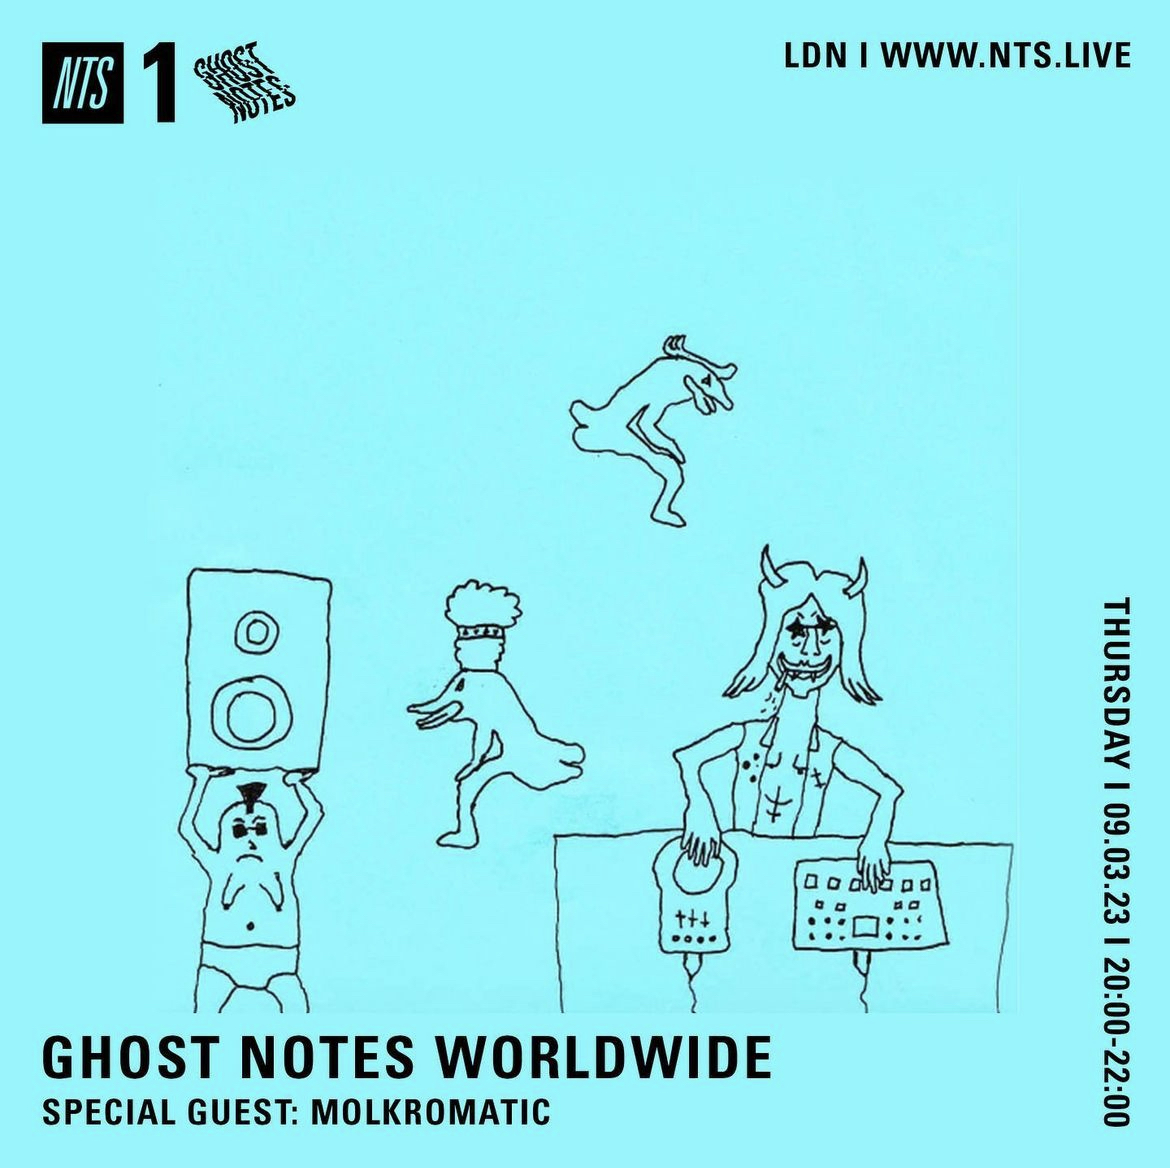 90 more minutes of .@Ghost__Notes live from our London studio with @TxImpey and special guest Molkromatic Tune in: nts.live/1